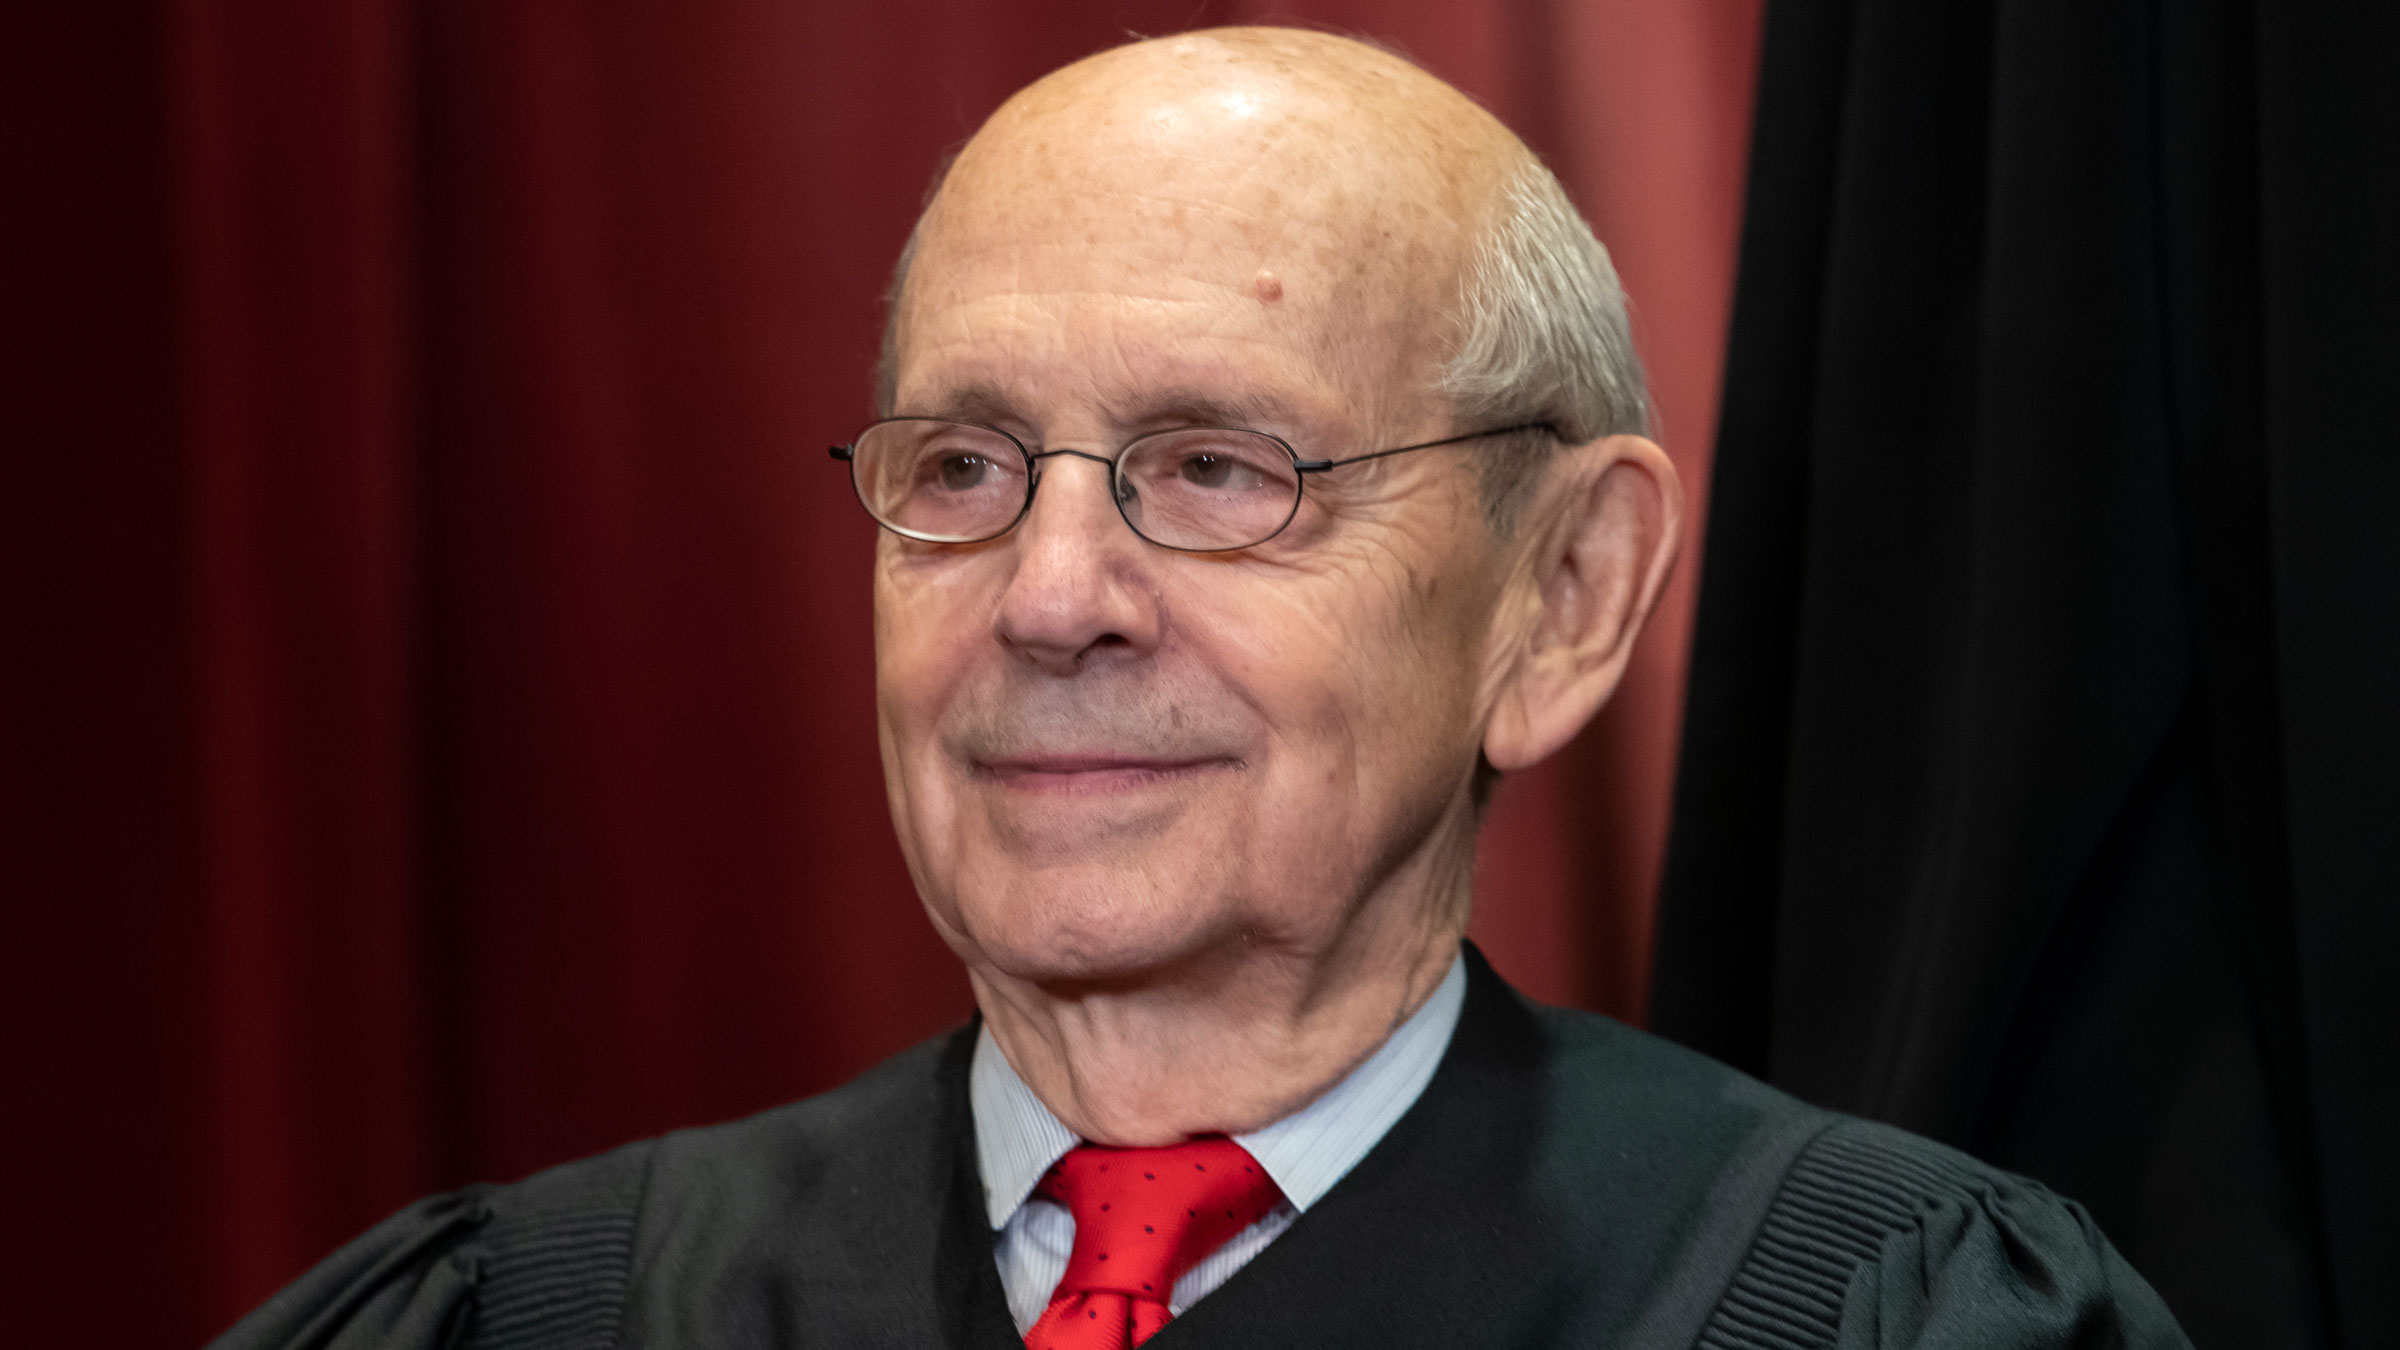 Stephen Breyer sits with his fellow Supreme Court justices for a group photo in 2018.